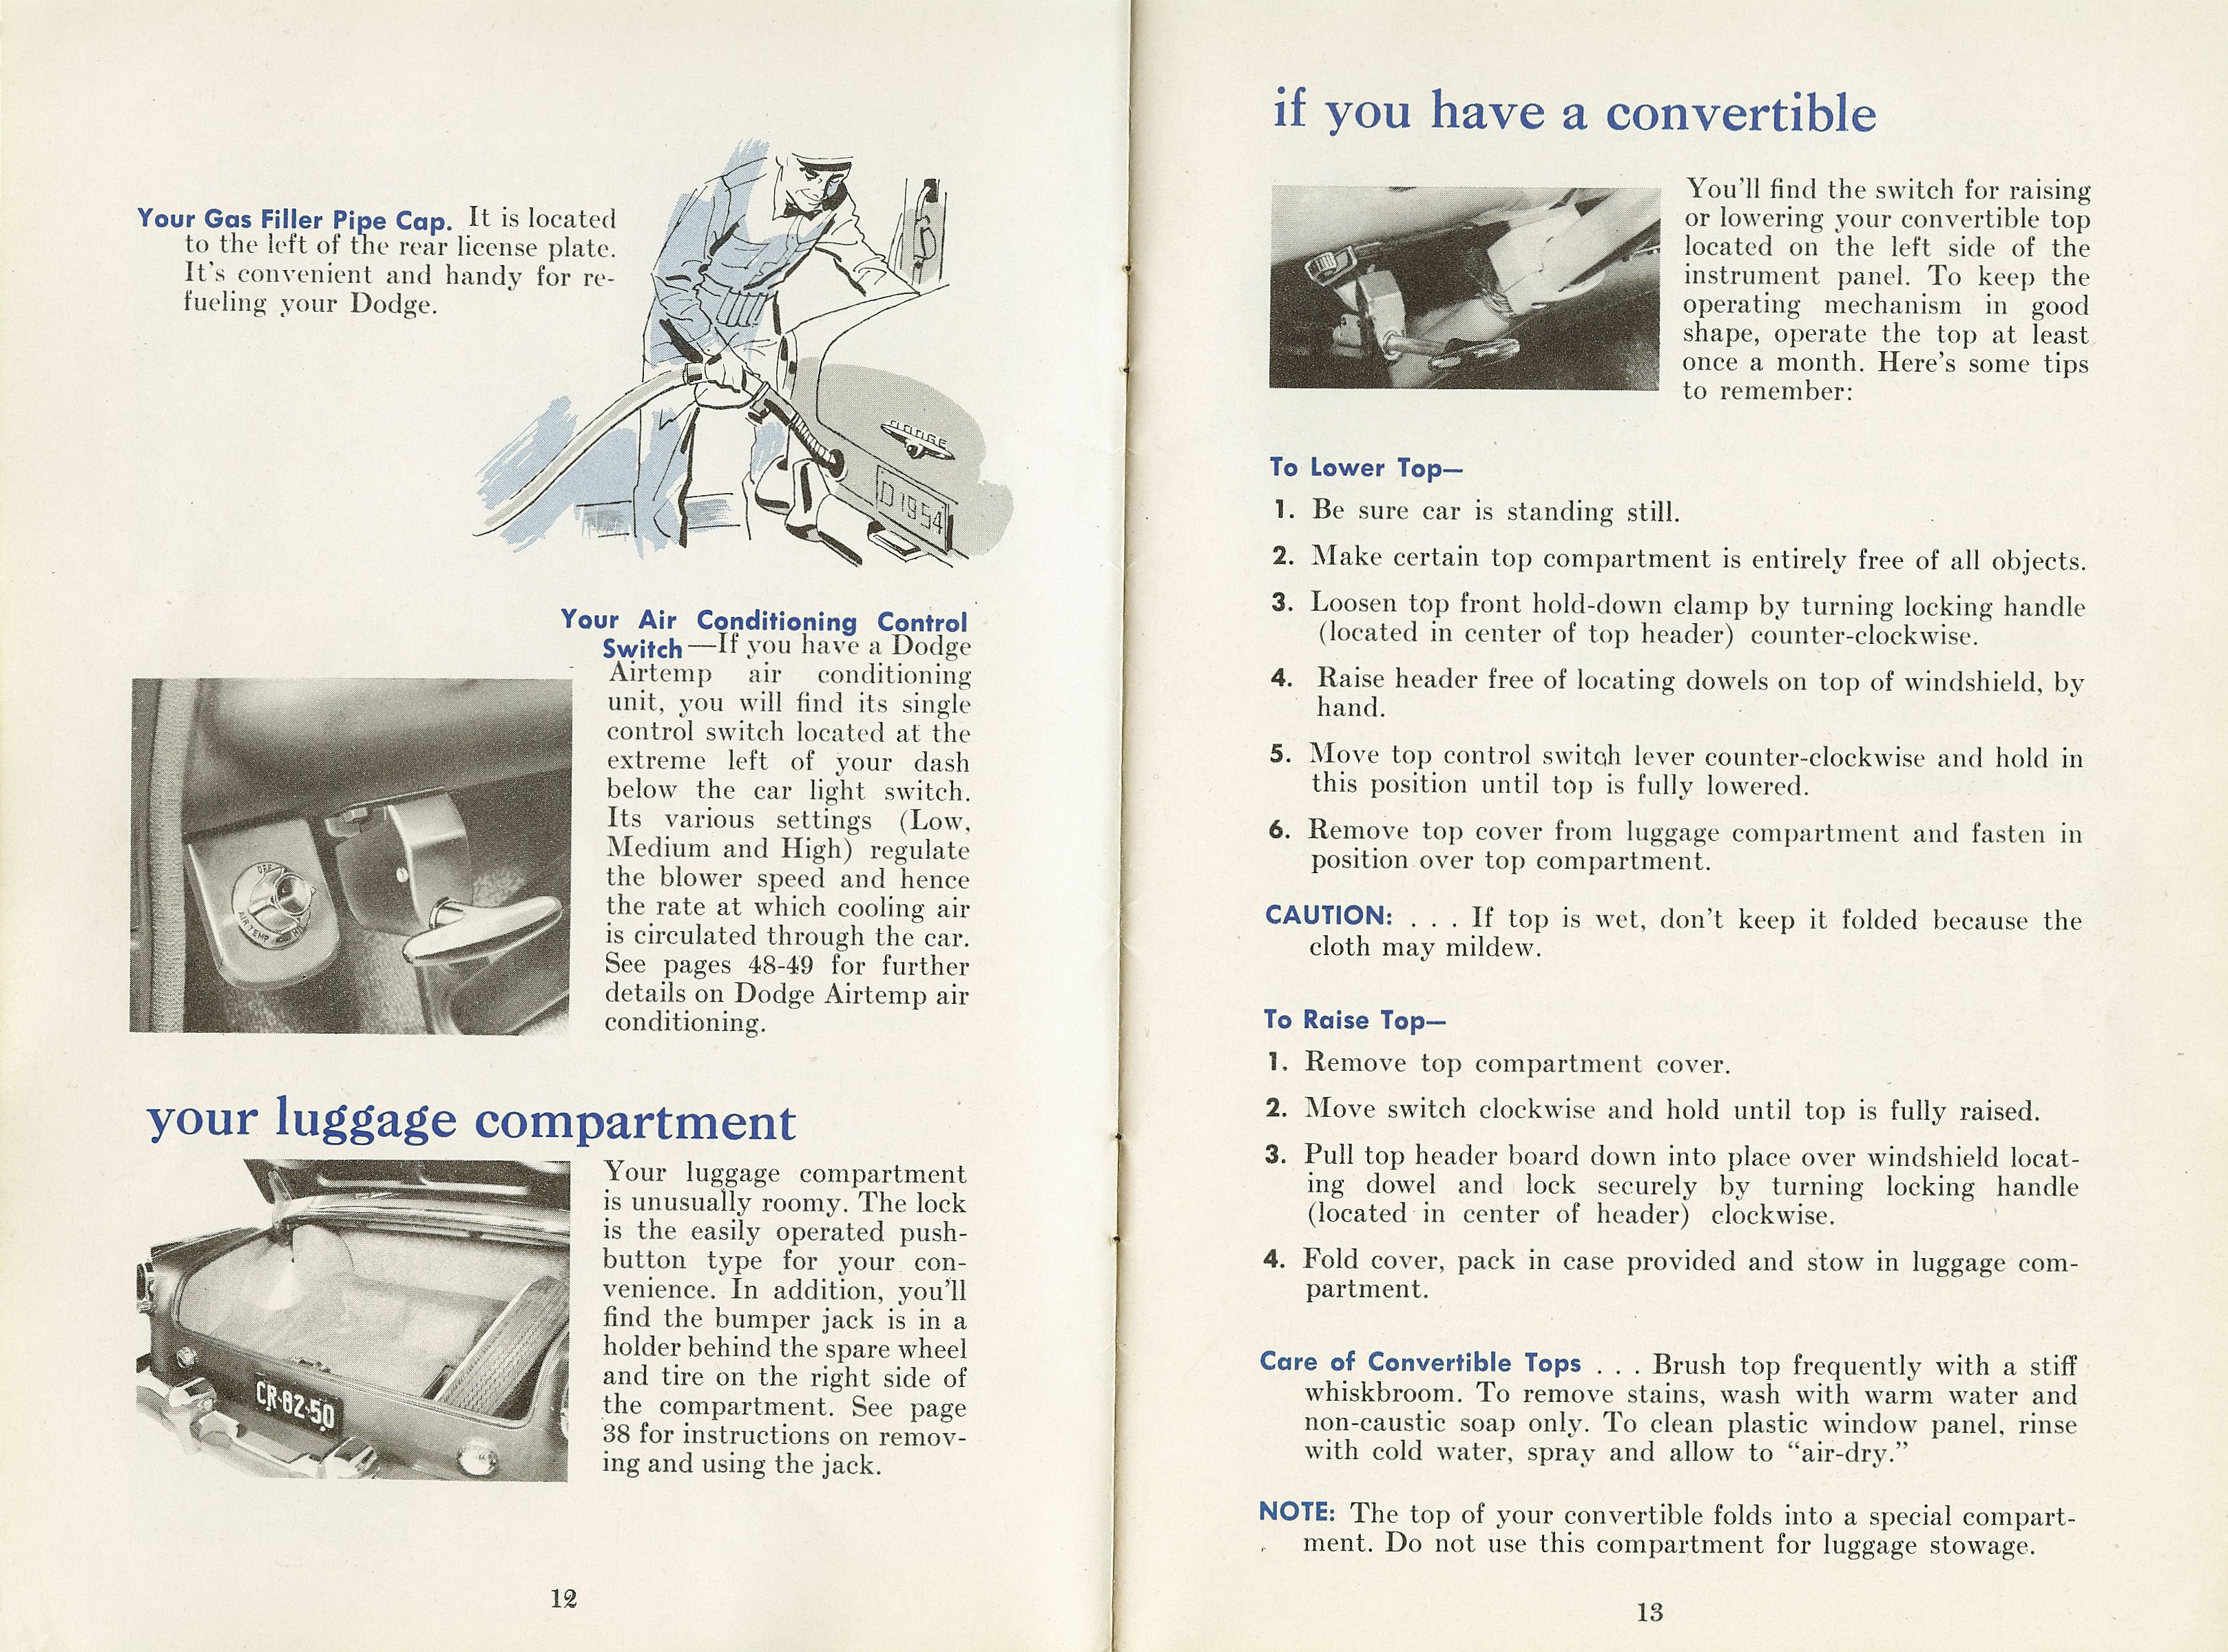 1954 Dodge Owners Manual-12-13